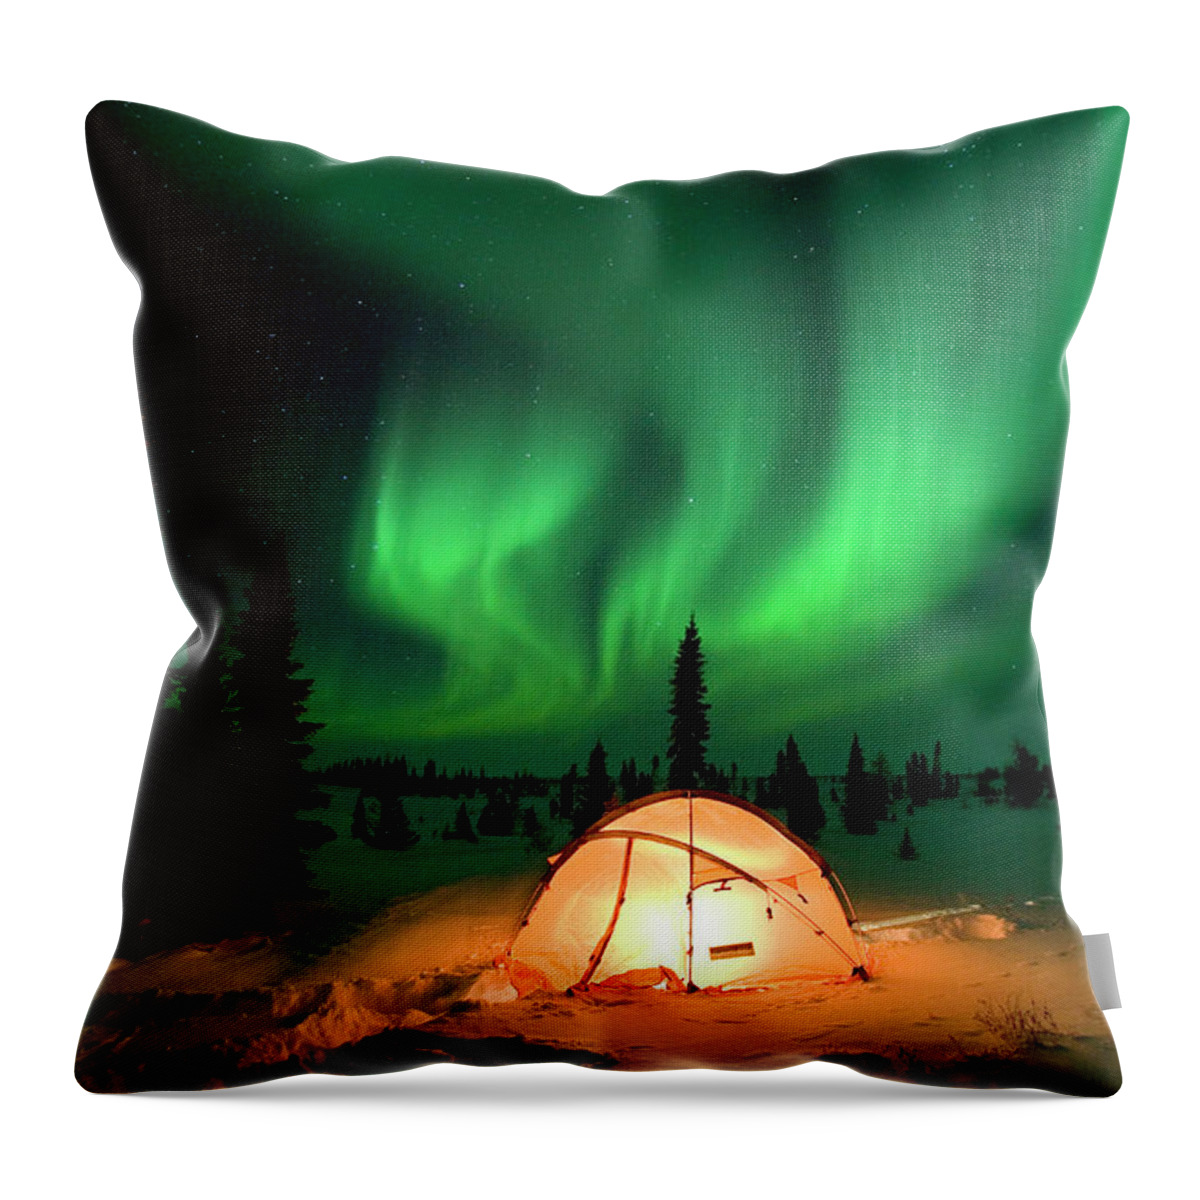 00600969 Throw Pillow featuring the photograph Northern Lights Over Tent by Matthias Breiter